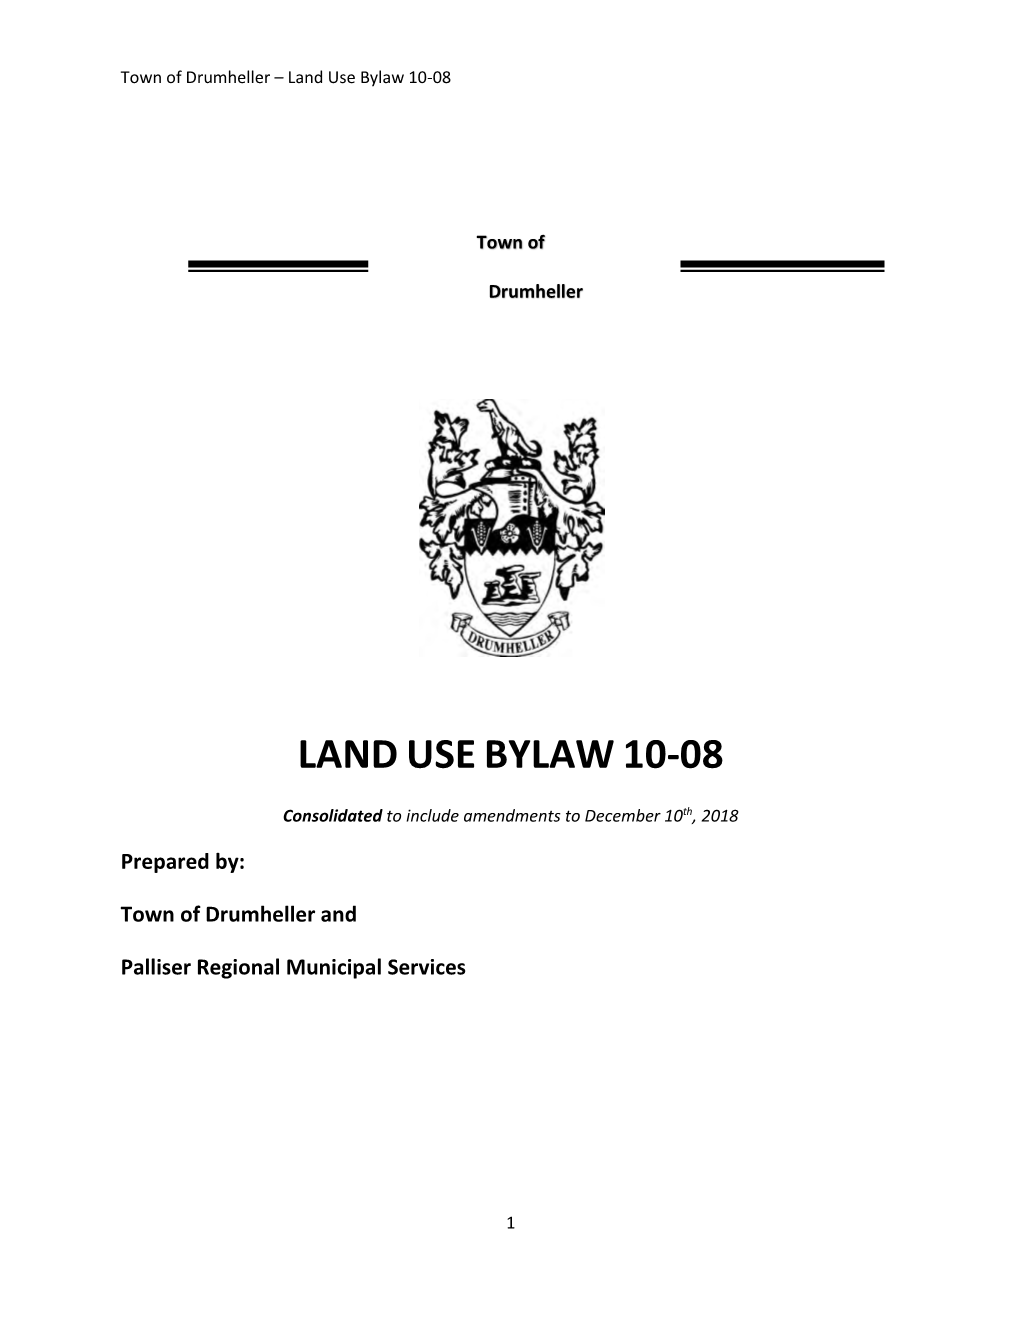 Land Use Bylaw 10-08 Consolidated December 10